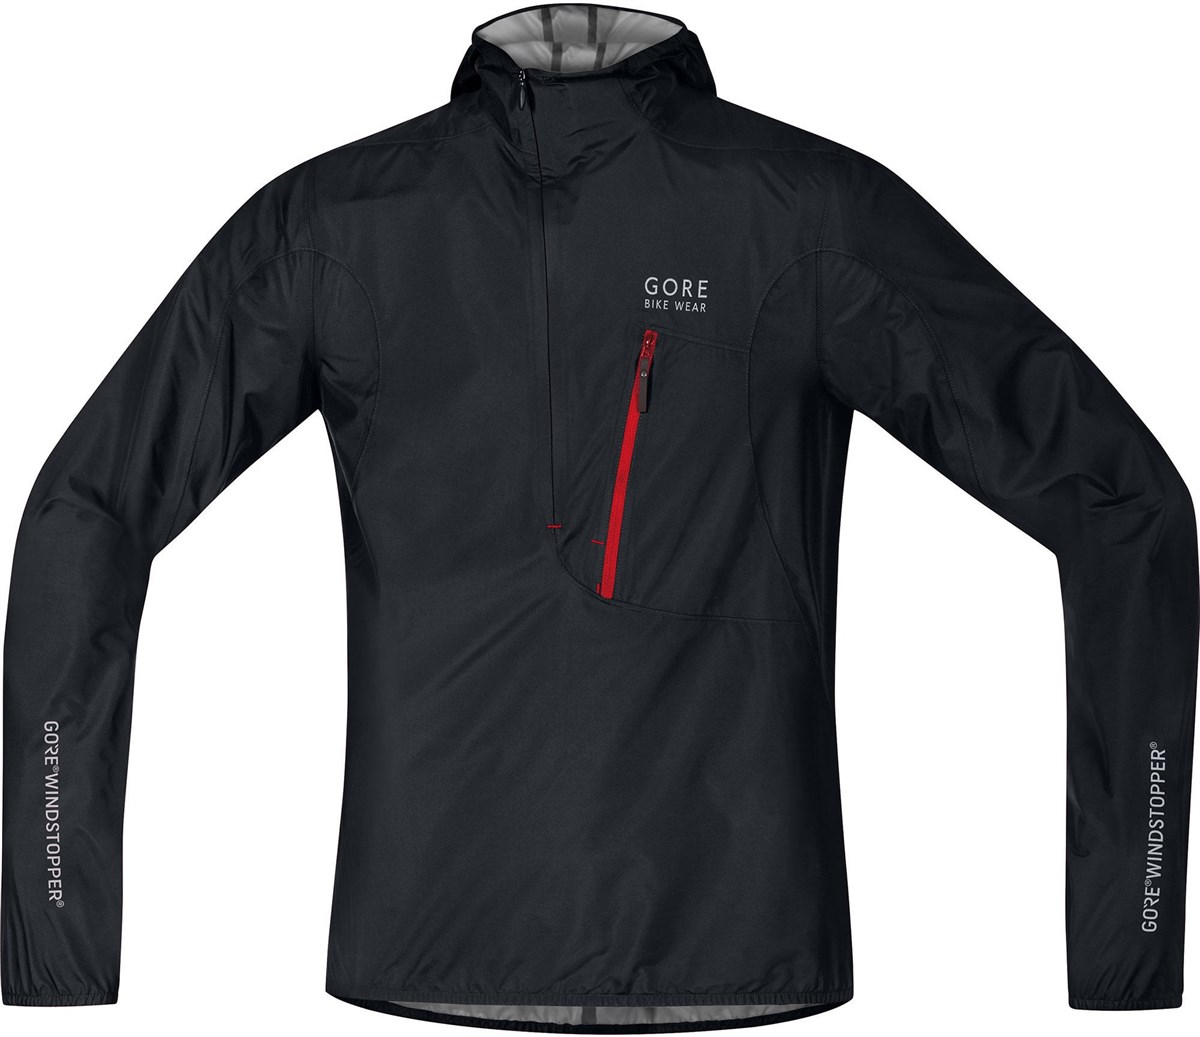 Gore Rescue Windstopper Active Shell Jacket AW17 product image